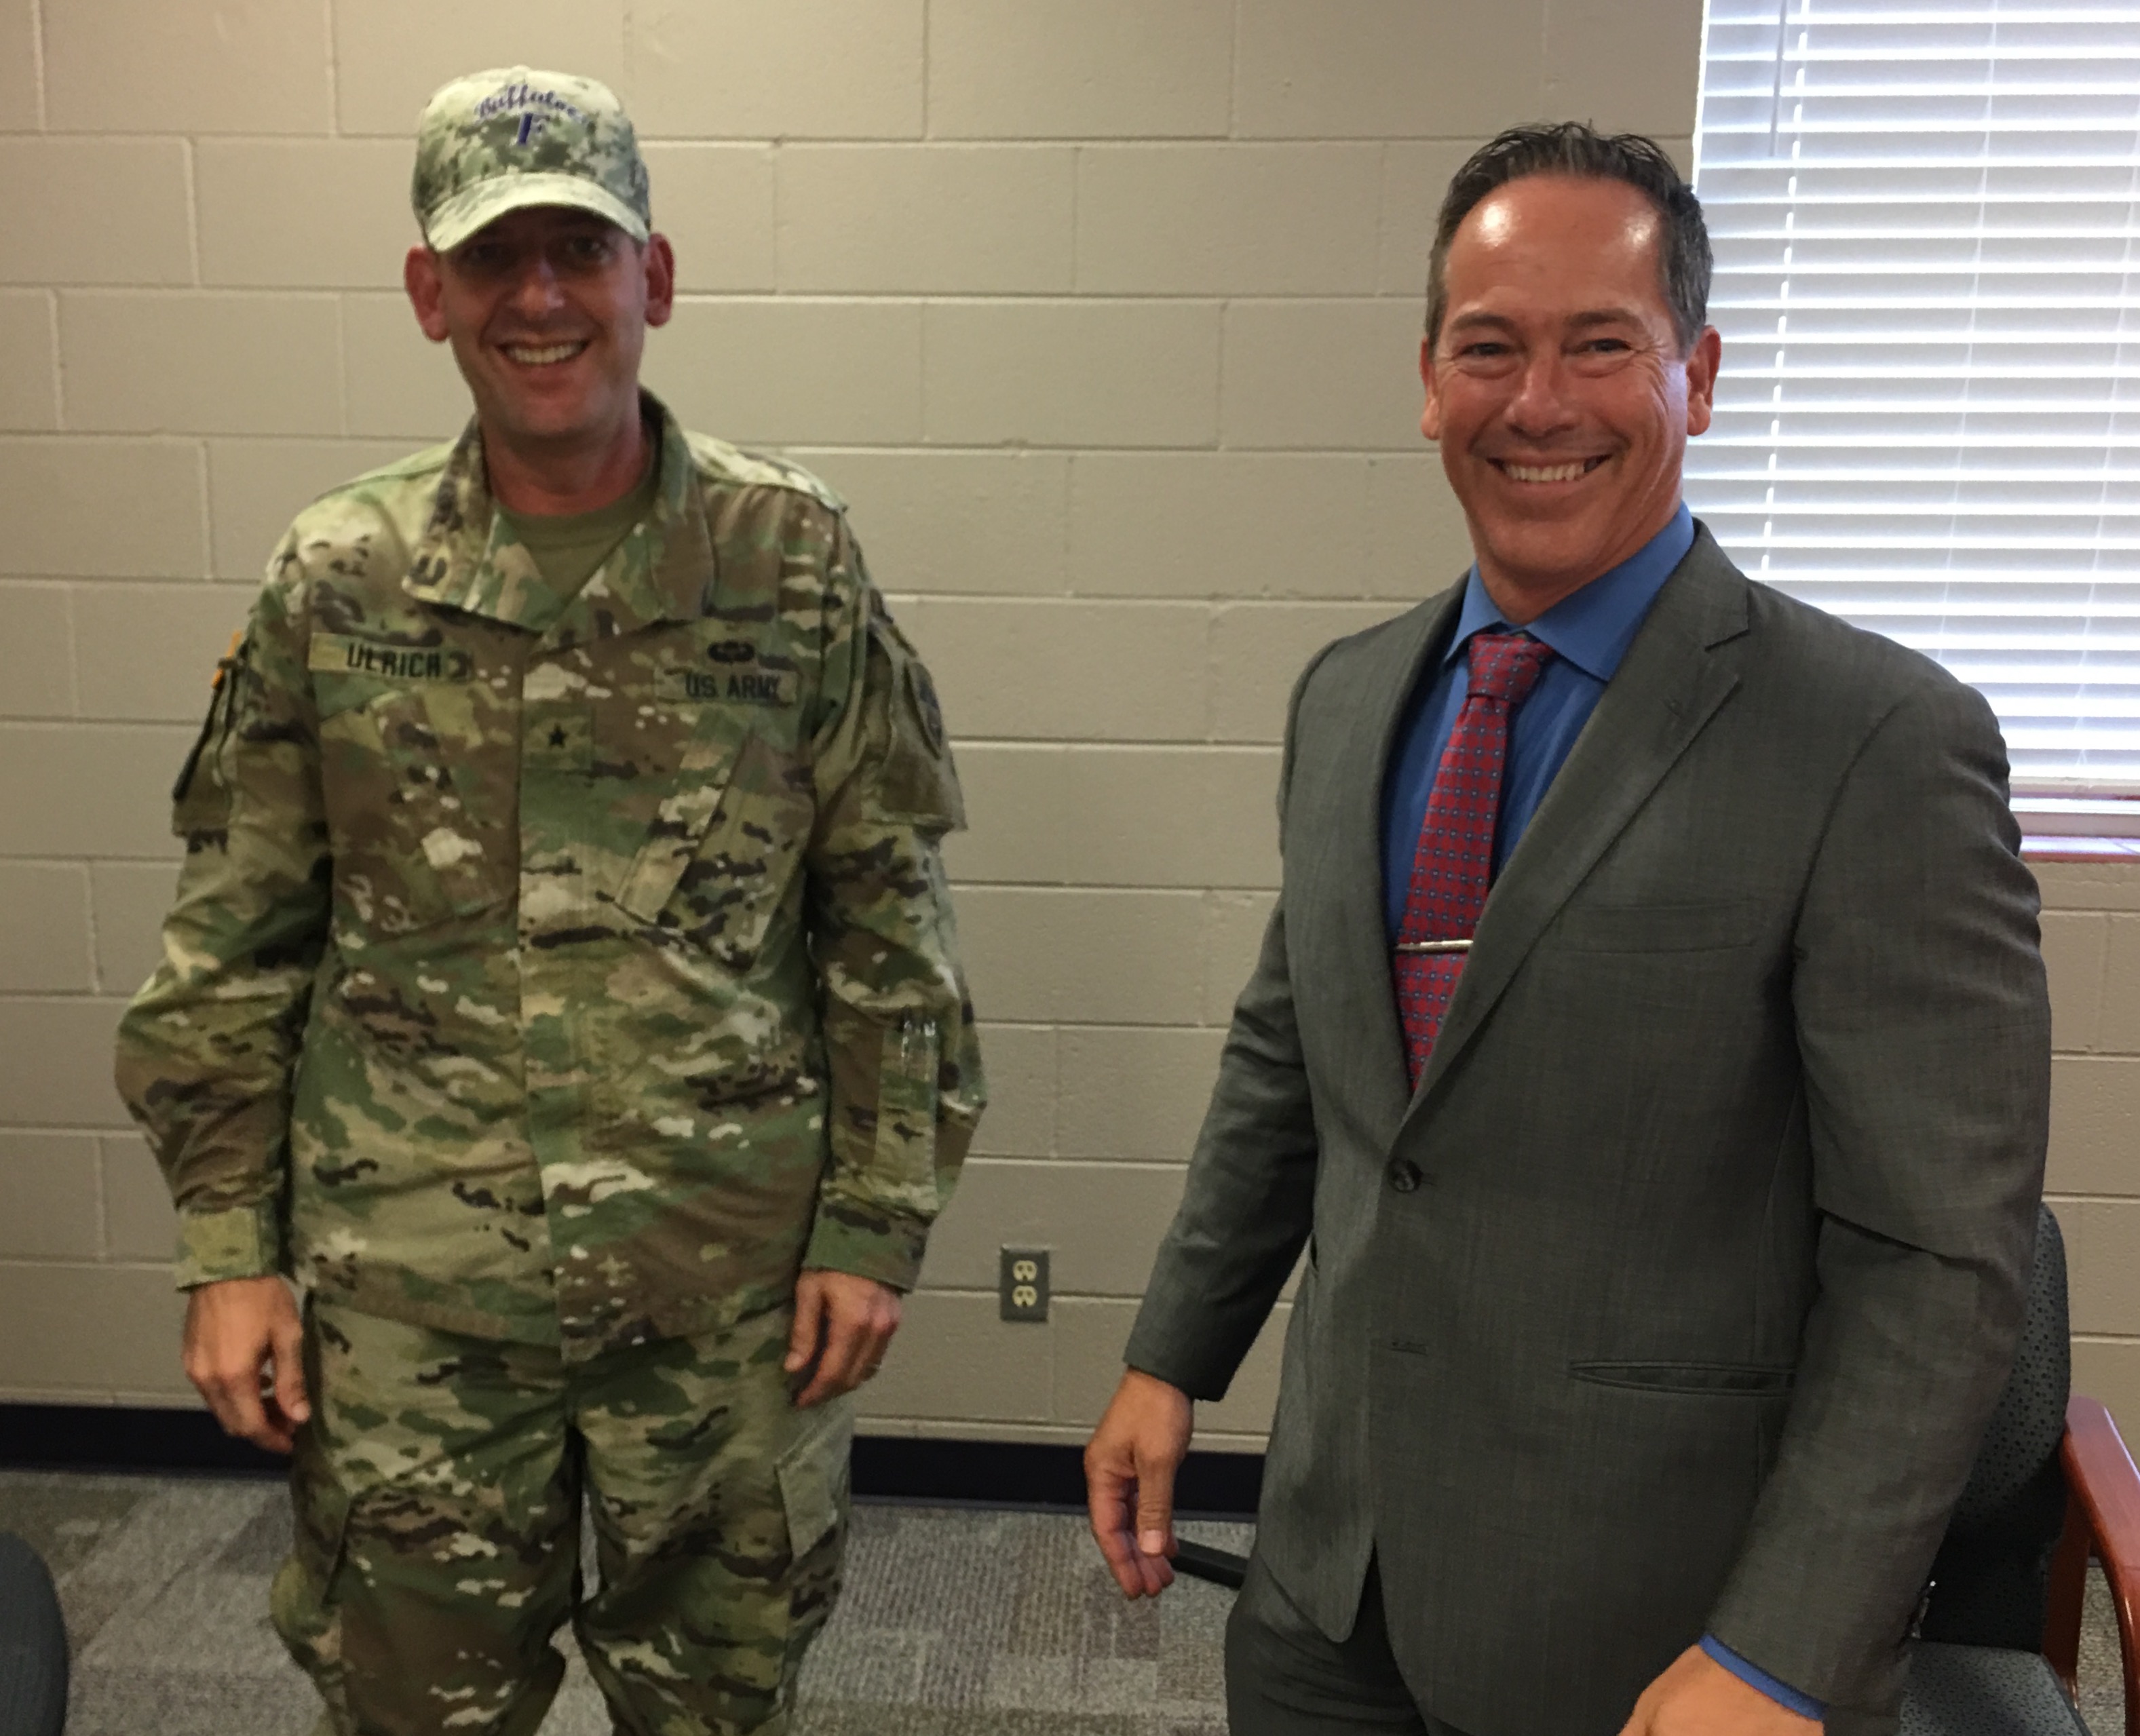 U.S. Army Operational Test Command Commander Brig. Gen. John C. Ulrich and Florence Independent School District Superintendent Paul Michalewicz are all smiles